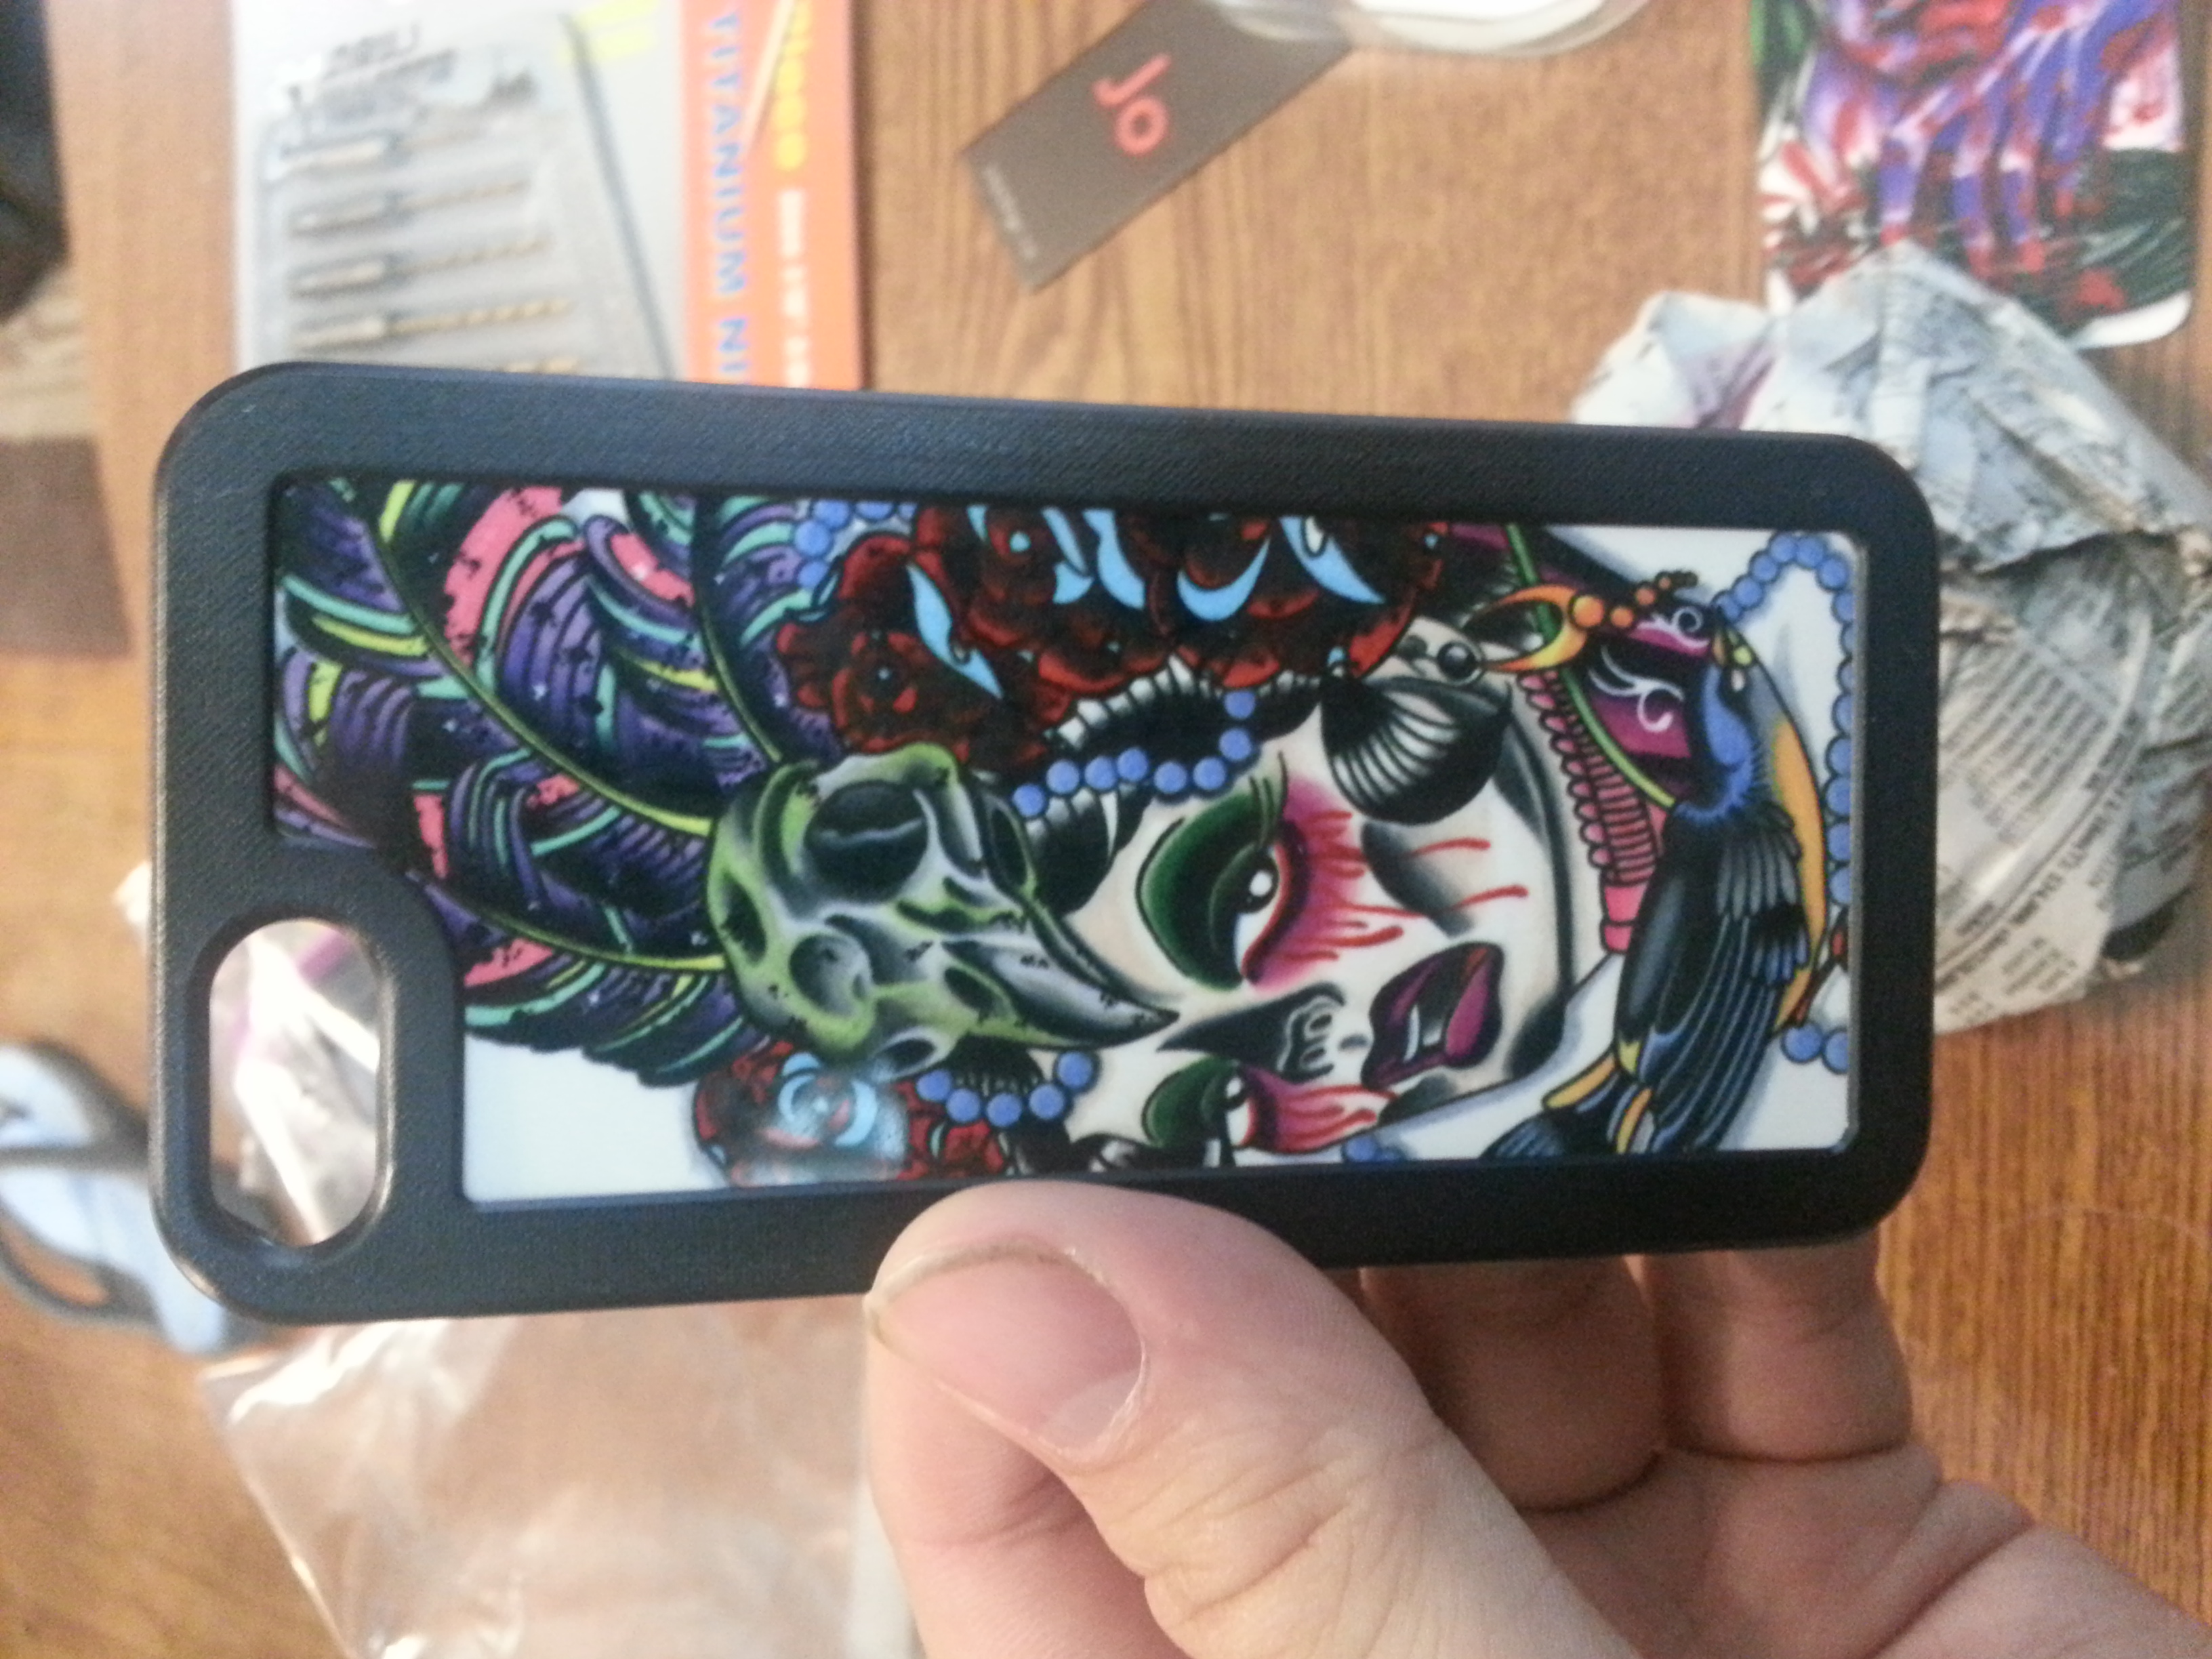 iPhone 5 Cases for Local Tattoo Legend Paul Kirk made with sublimation printing